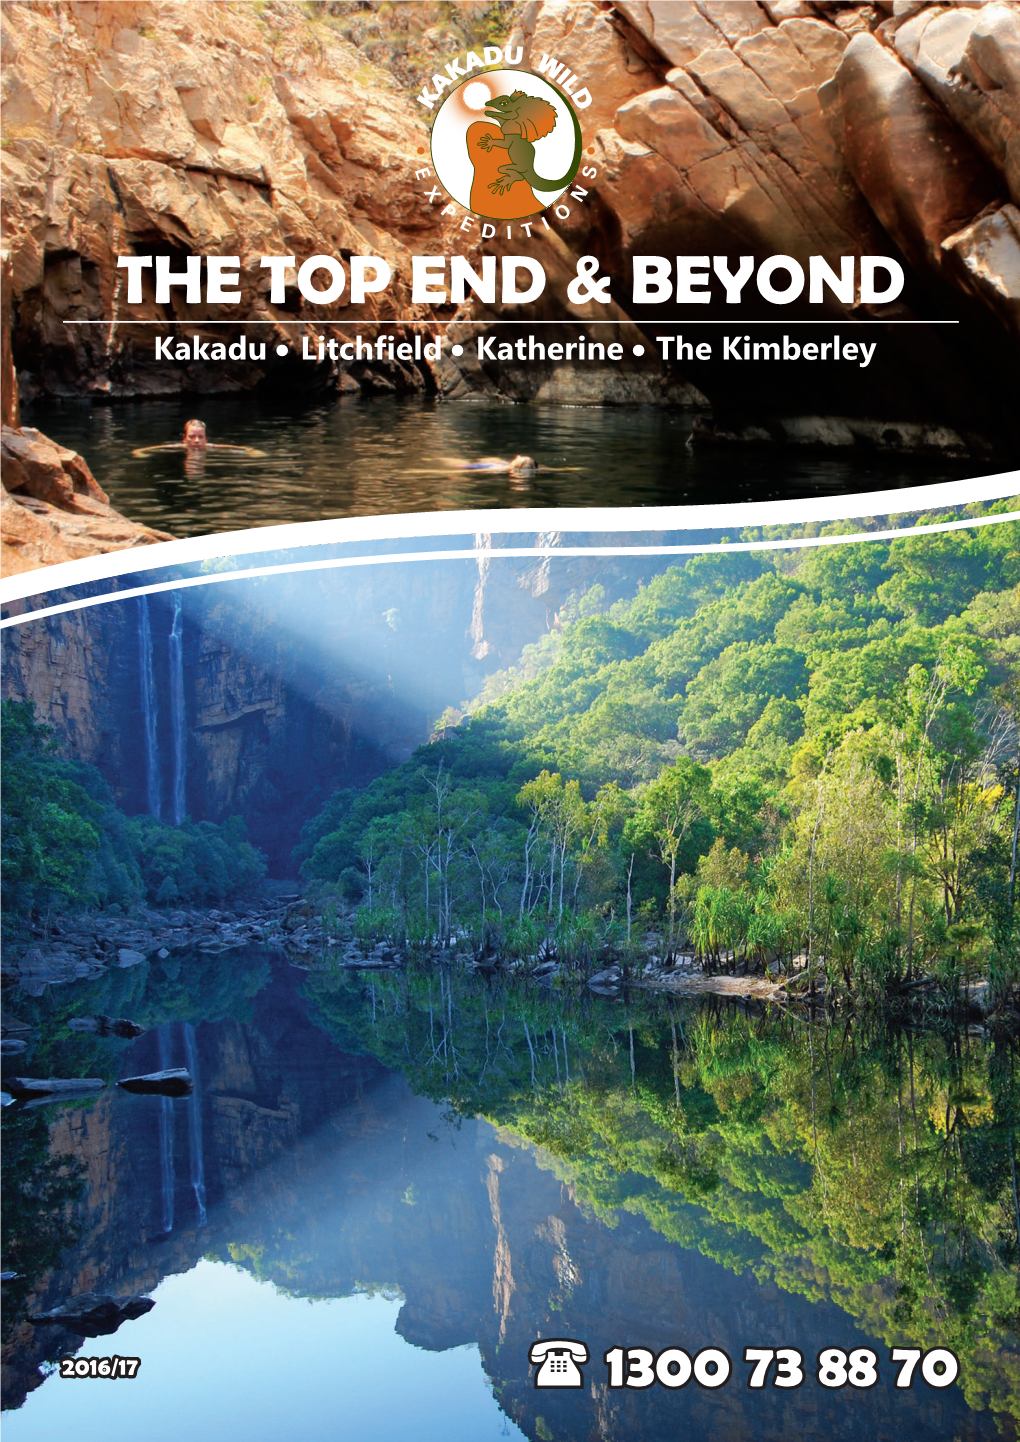 The Top End & Beyond